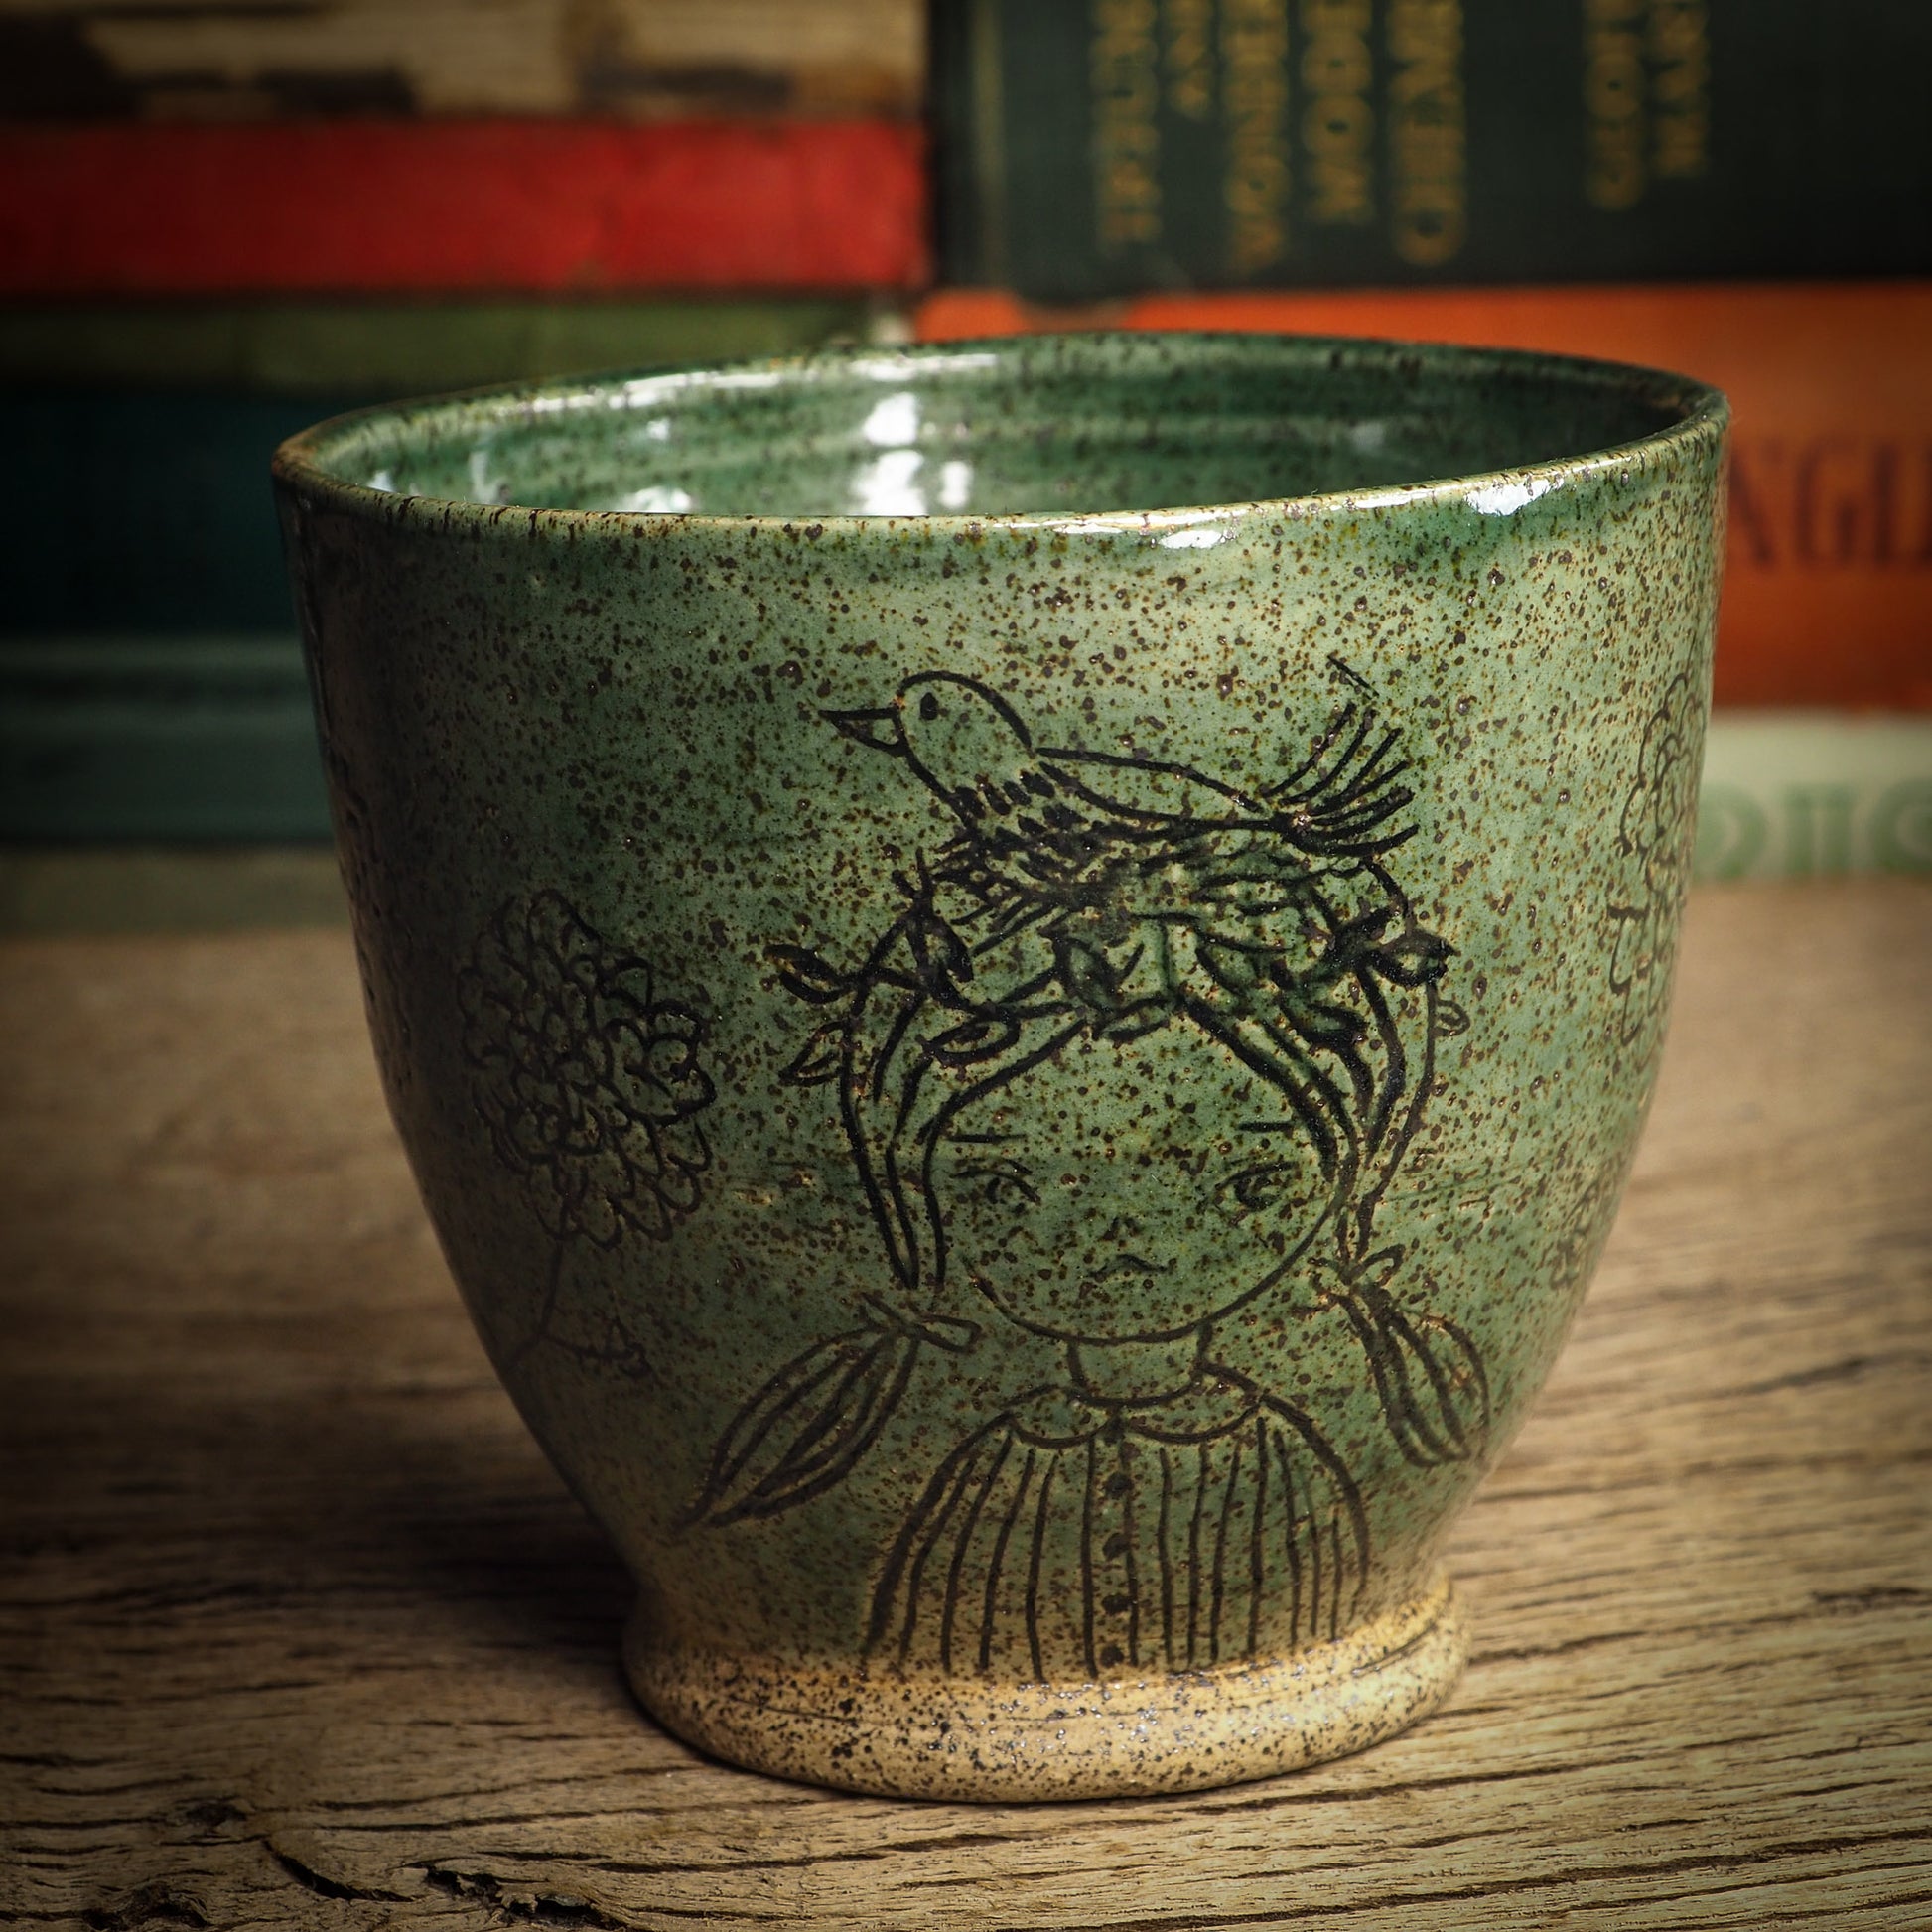 An original glazed ceramic mug by Idania Salcido, the artist behind Danita Art. It measures 4 x 4 x 3.5 Inches, with deep green hue glazes and hand decorated figures on the sides. Totally handmade in my studio, this is a unique piece that cannot be repeated. Food and drink safe, hand wash only.